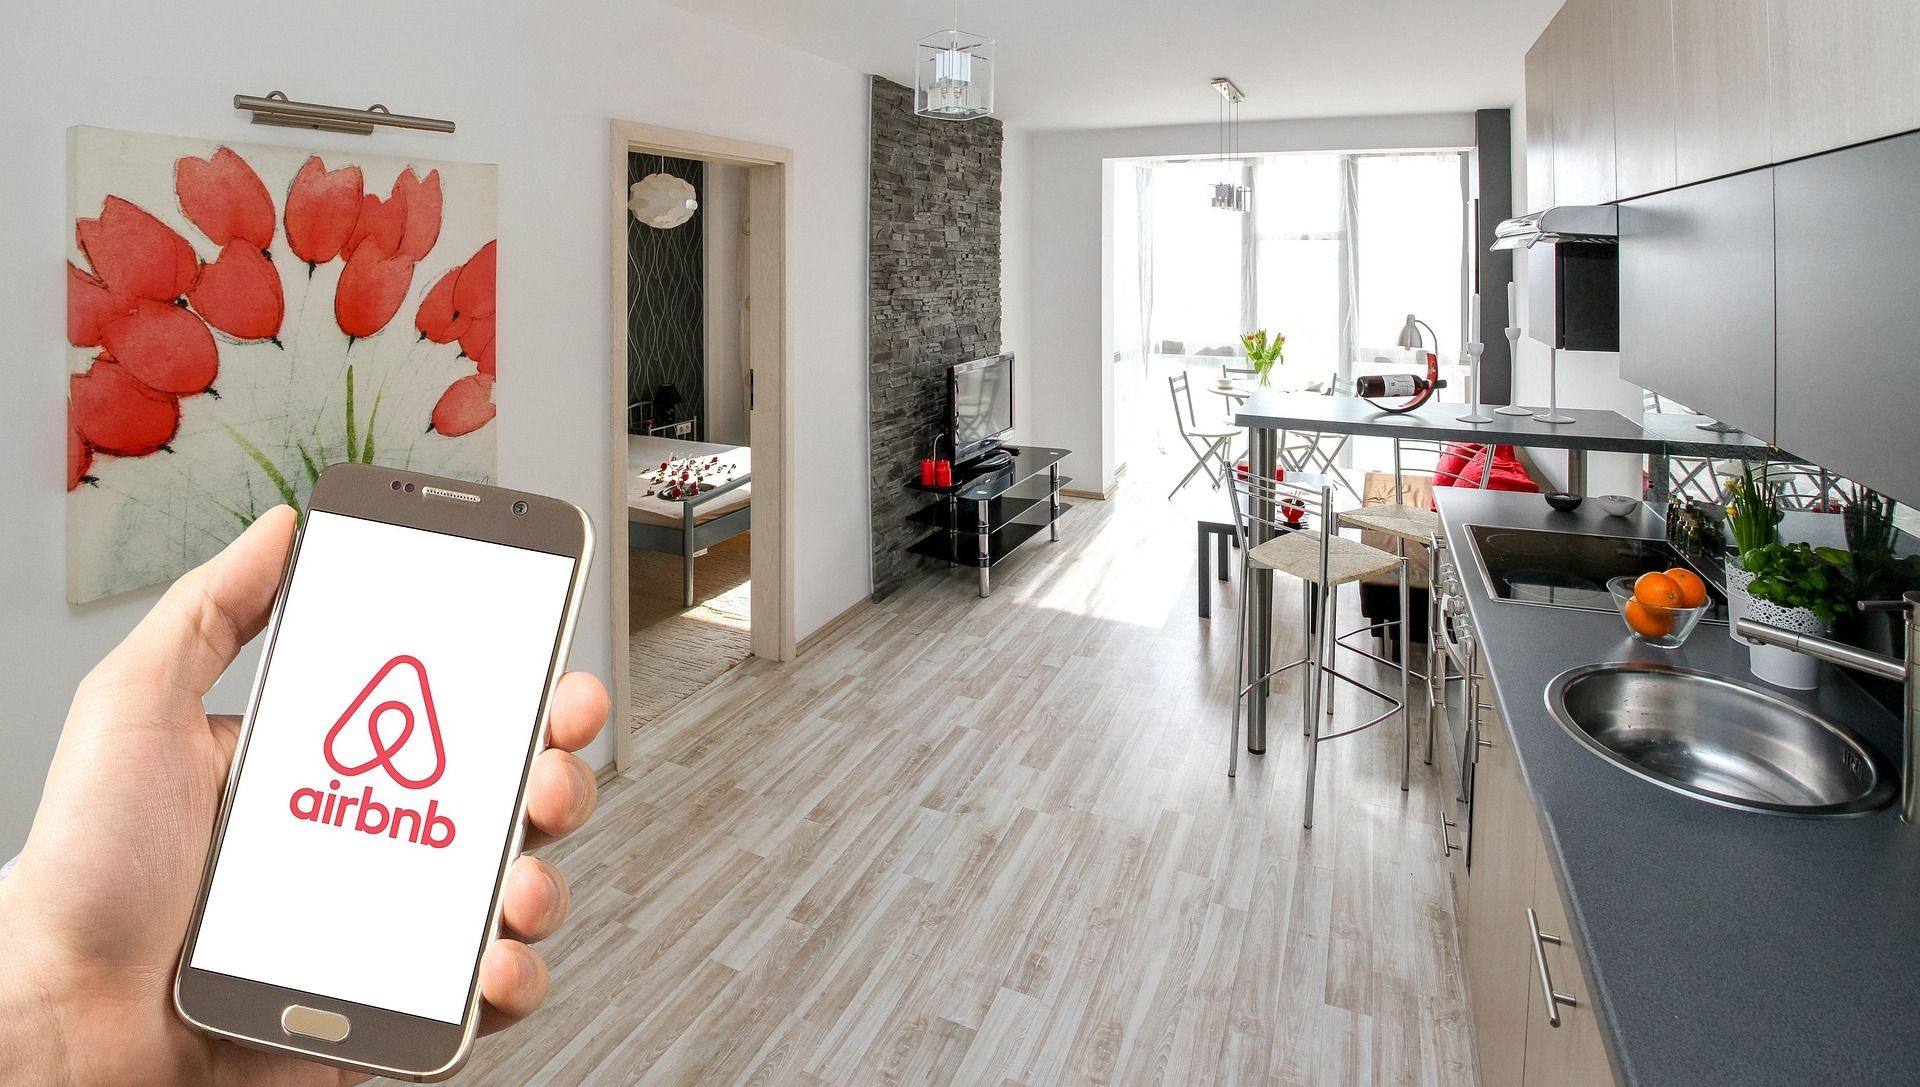 Rent Out You Space With Airbnb UK